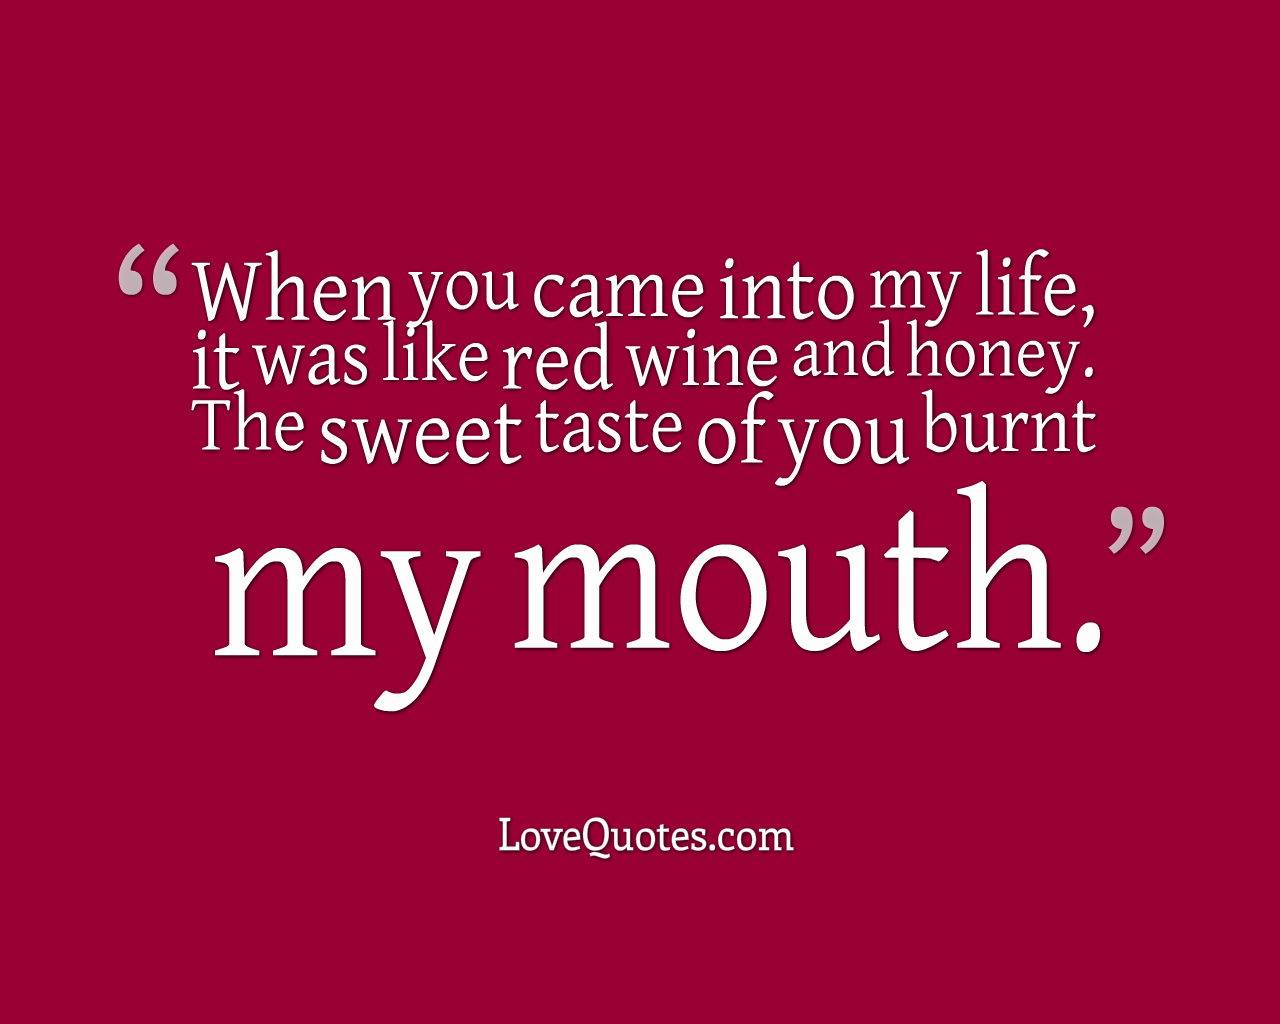 The Sweet Taste Of You